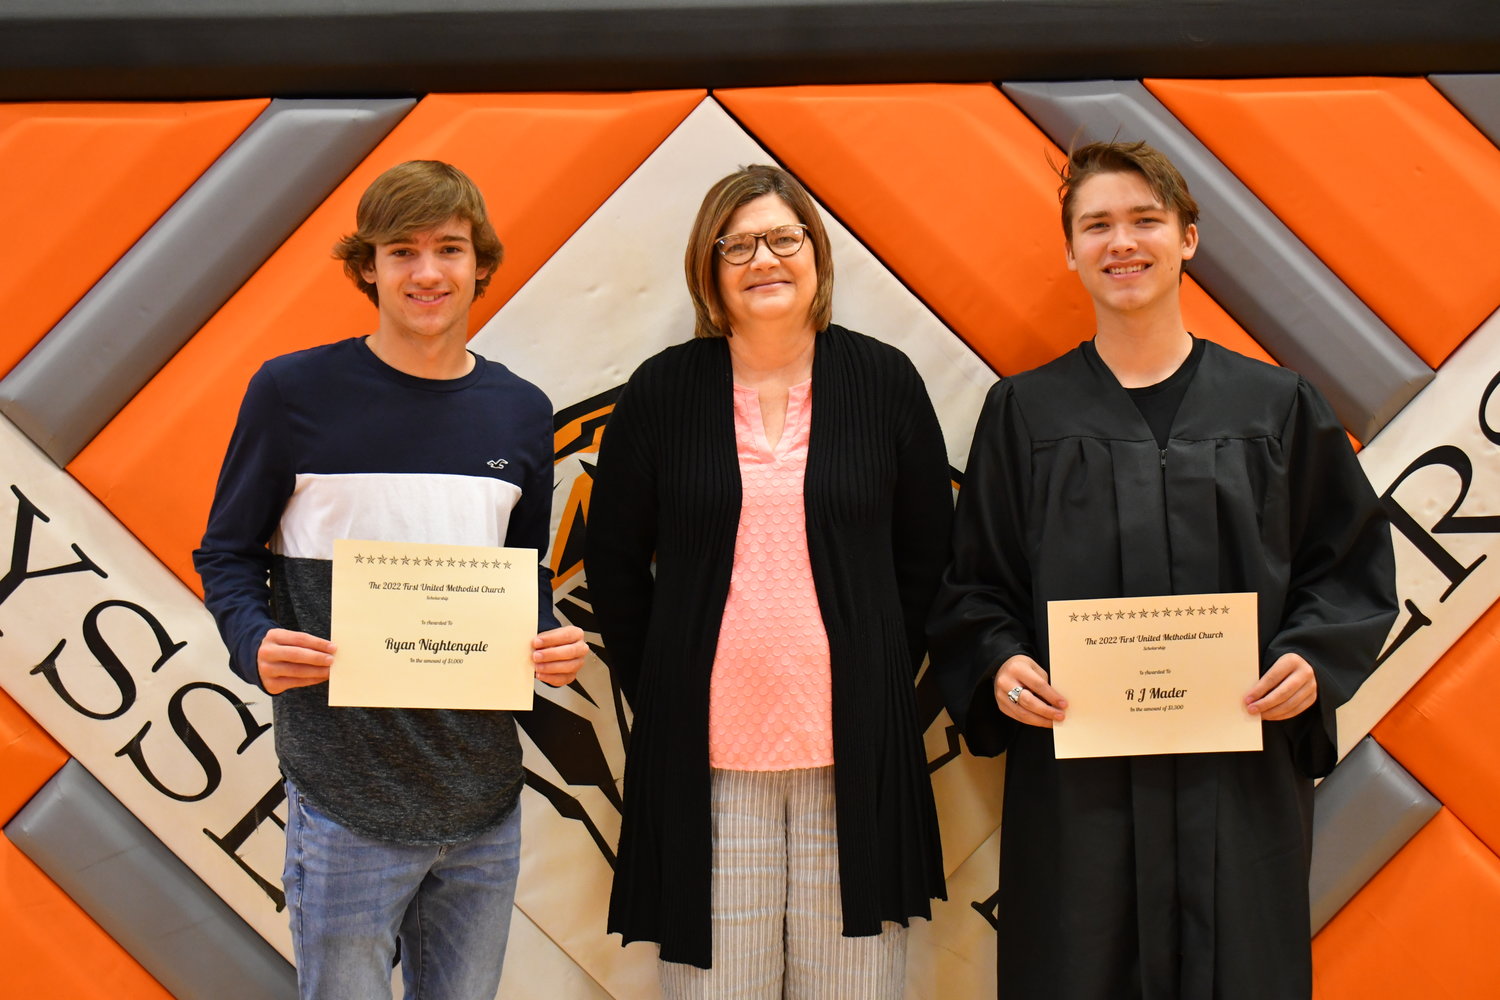 Senior Awards — Ryan Nightengale and R.J. Mader were given the First United Methodist Church Scholarship by Katrina Benysheck on Friday, May 13, 2022.